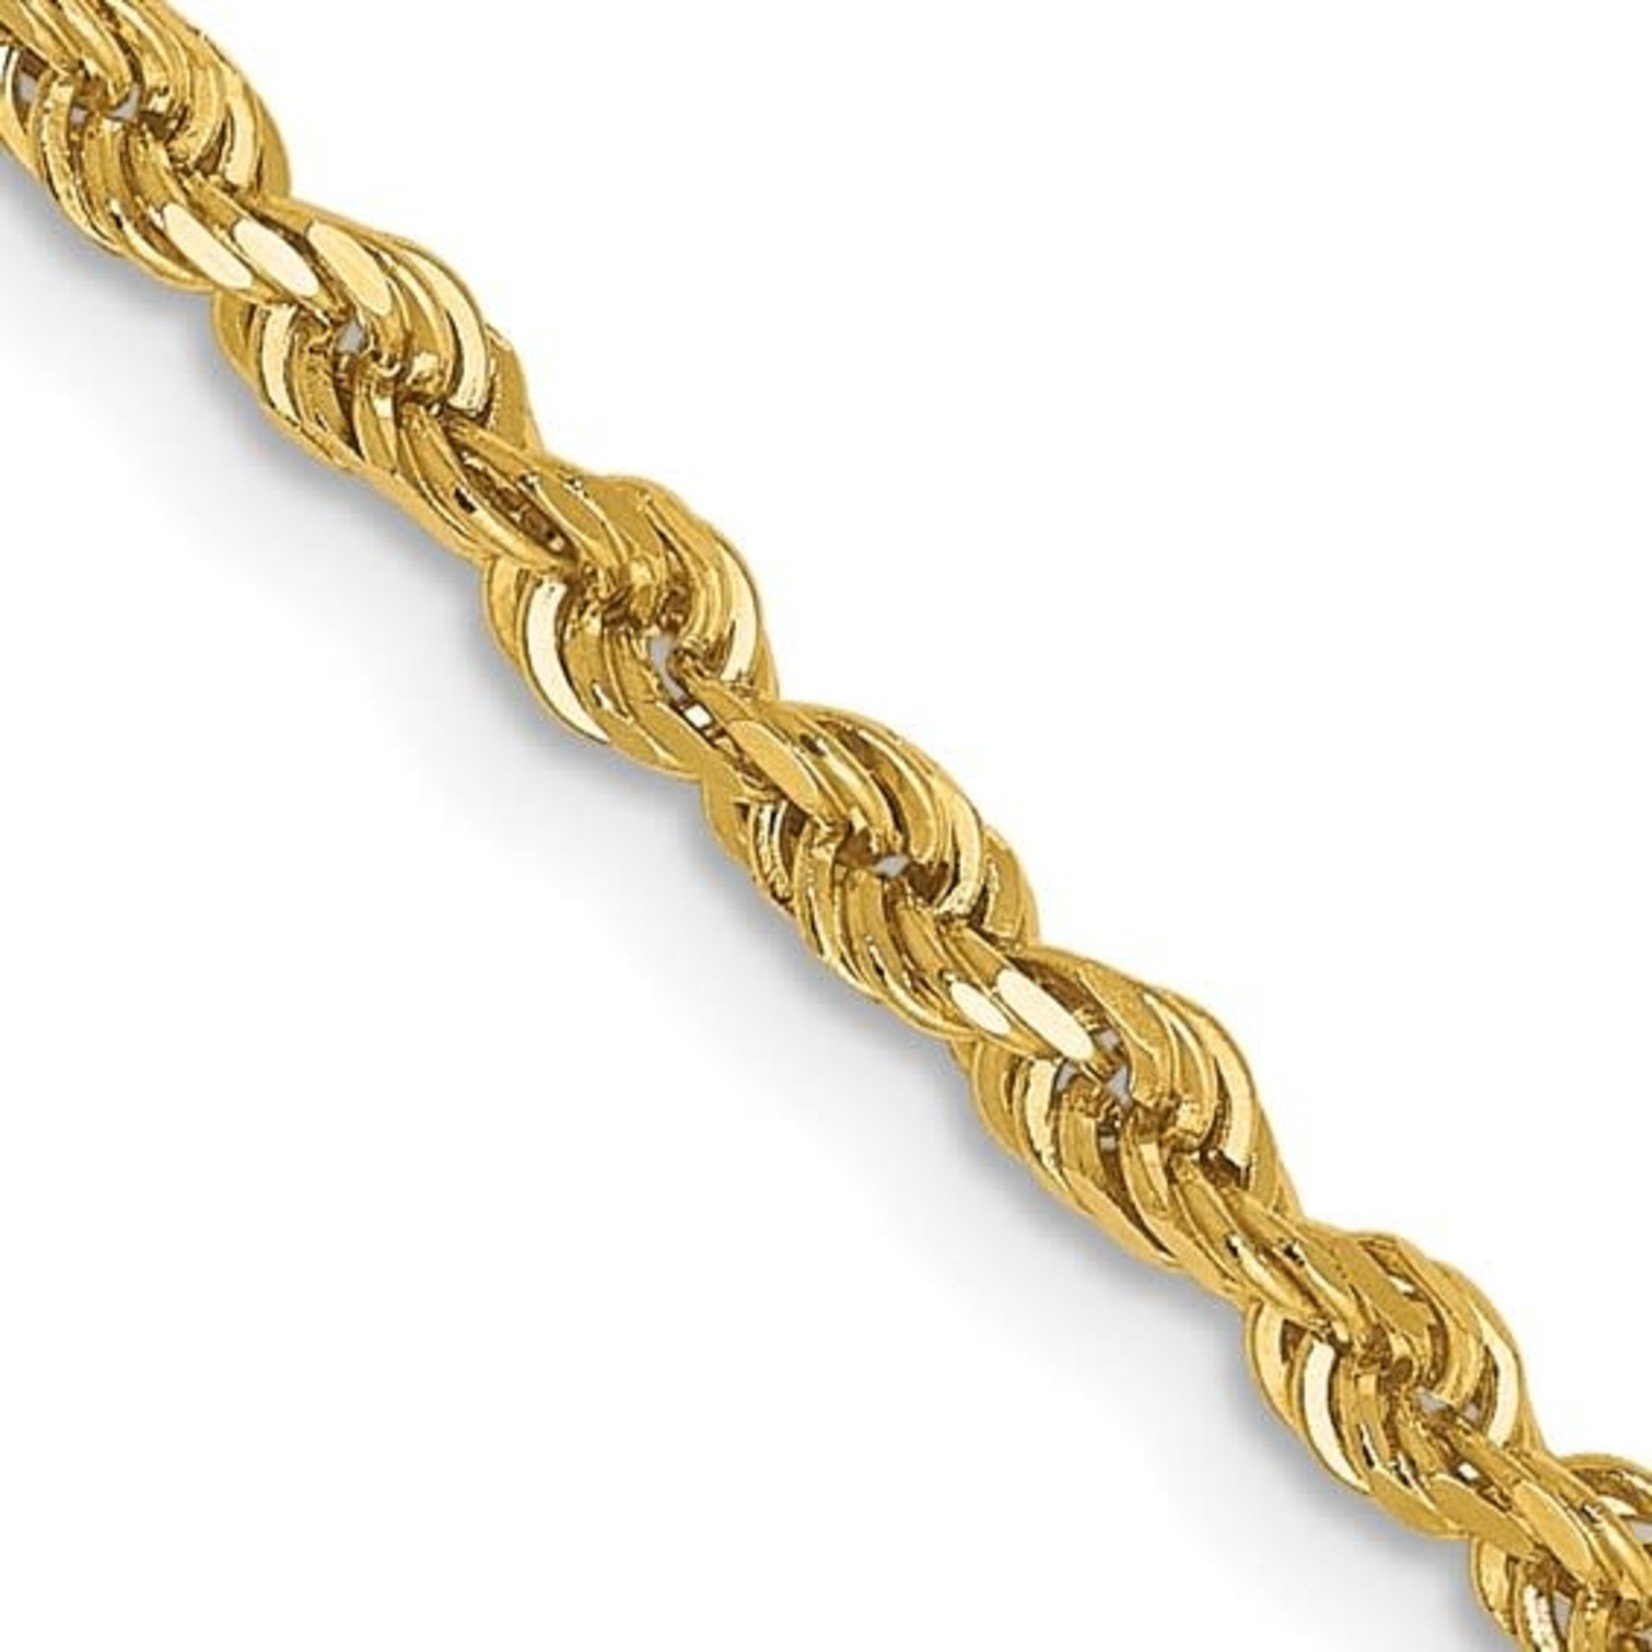 STAINLESS STEEL GOLD HEAVY ROPE CHAIN NECKLACE 33x 9mm 145g C215